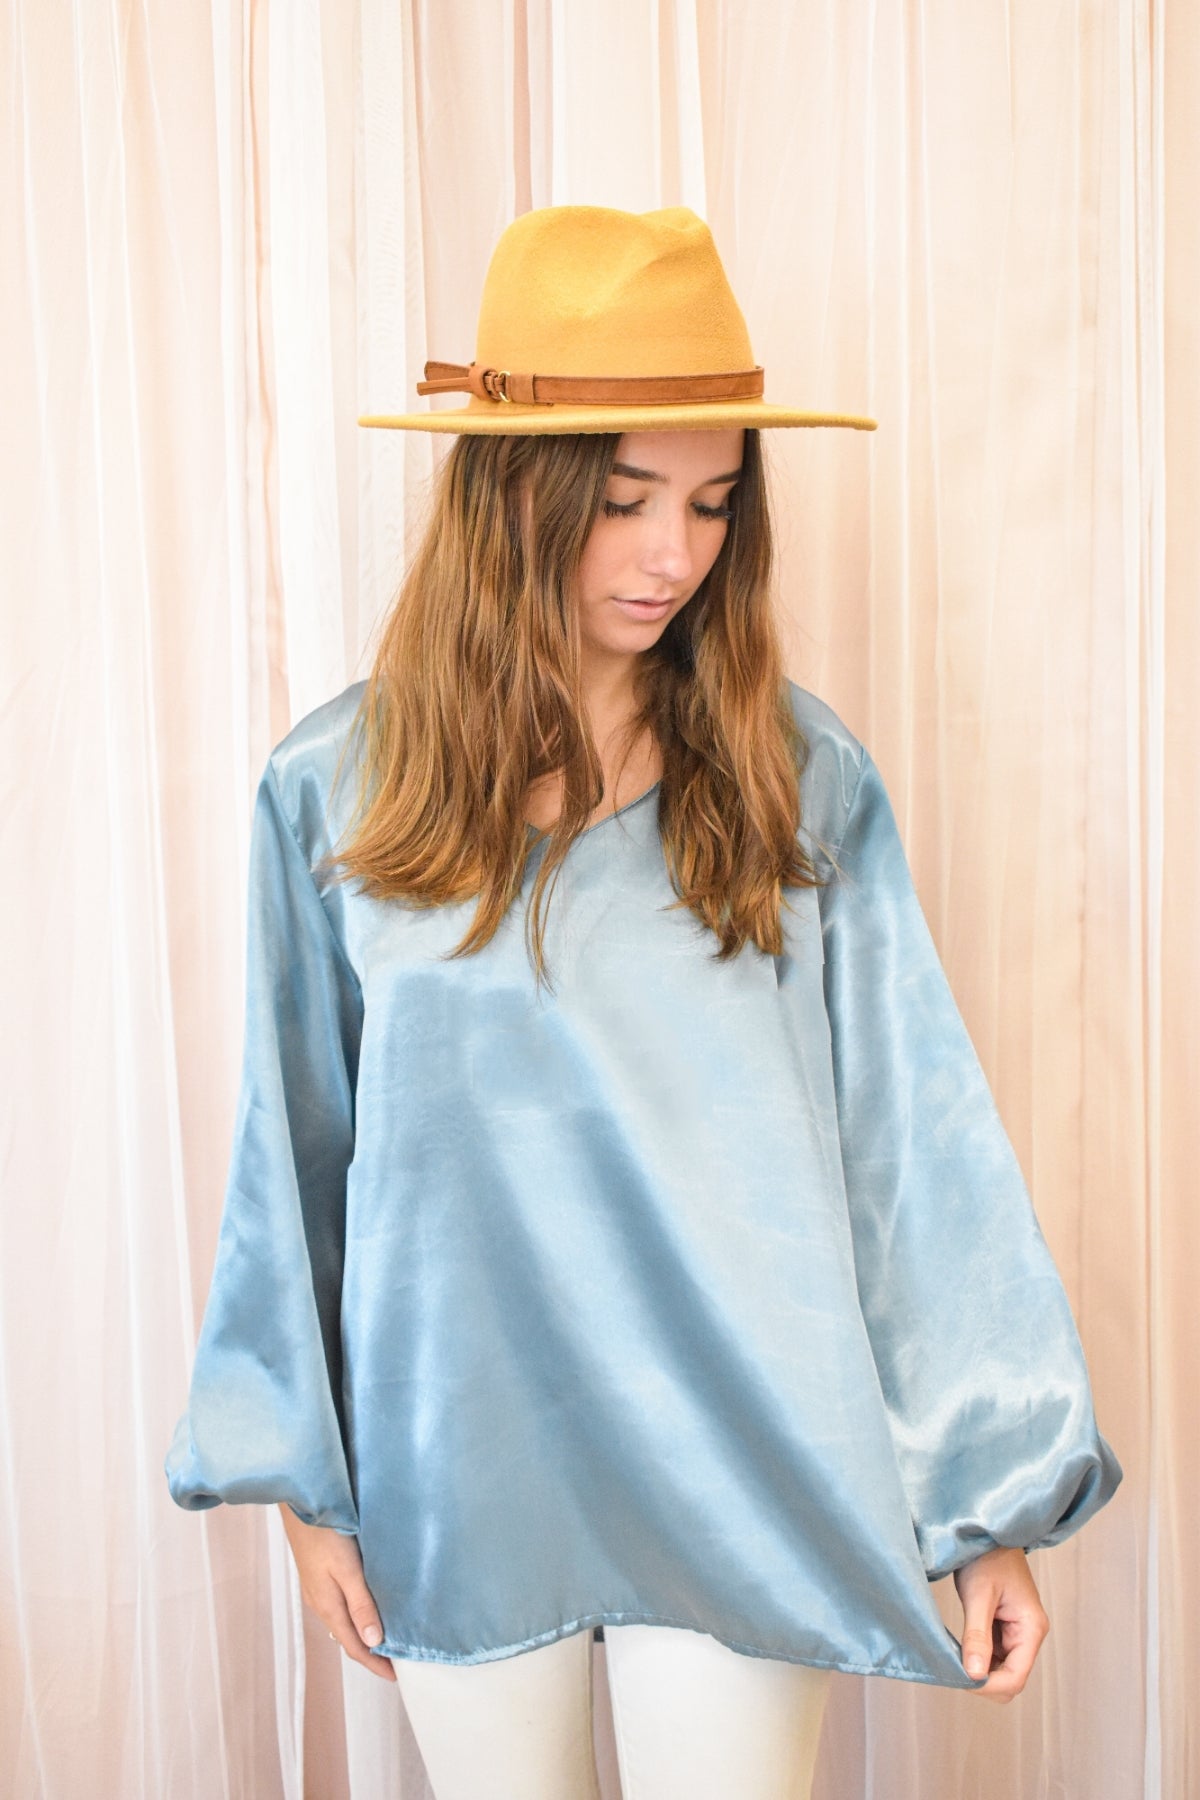 Shine Bright Blouse-Baby Blue - Southern Grace Creations